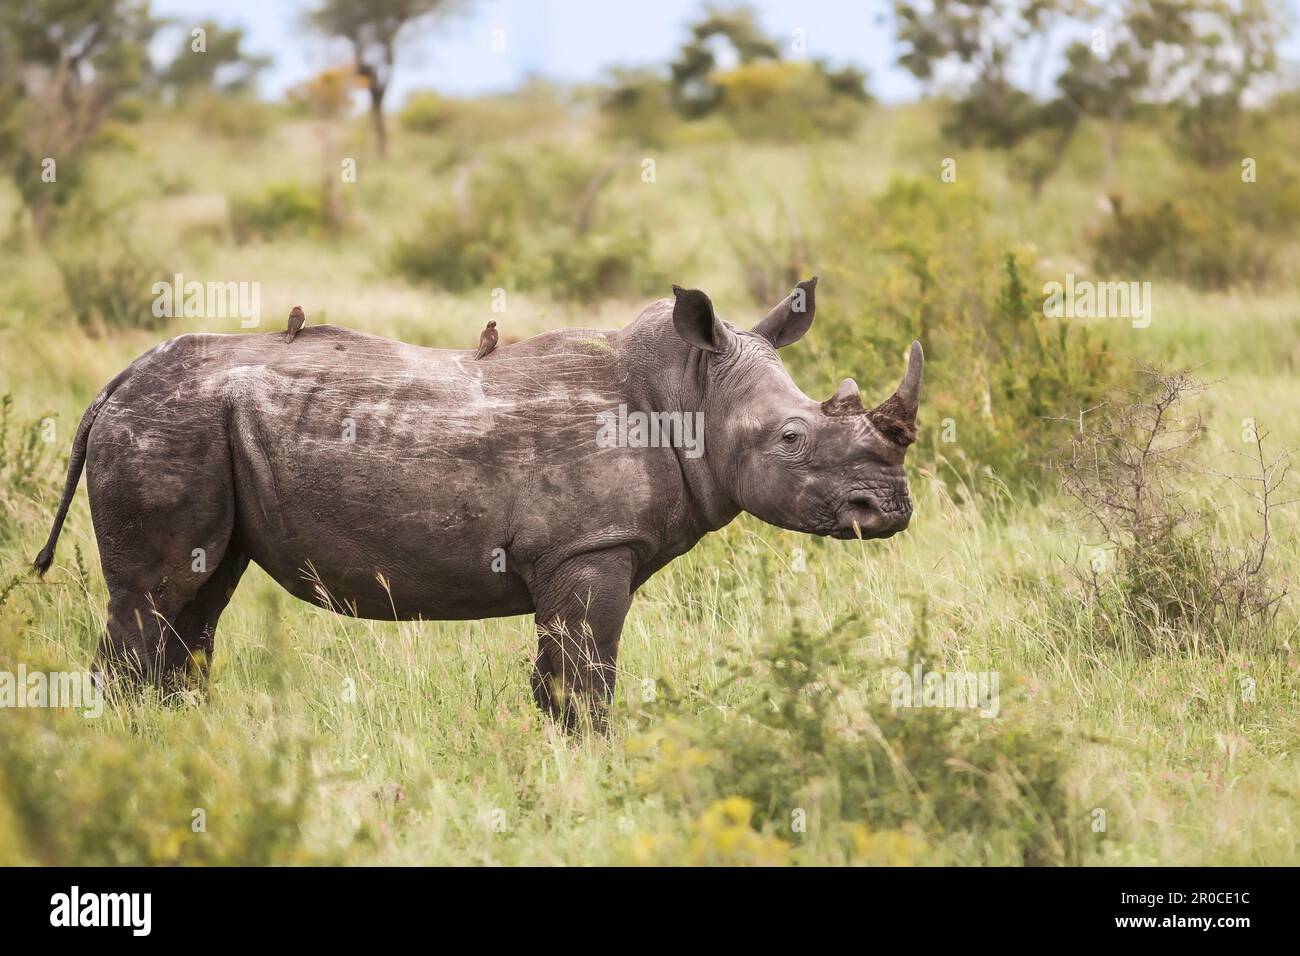 White rhinoceros standing in the African bush. Side view of full-length body, two oxpeckers on back, two horns. Kruger National Park, South Africa Stock Photo